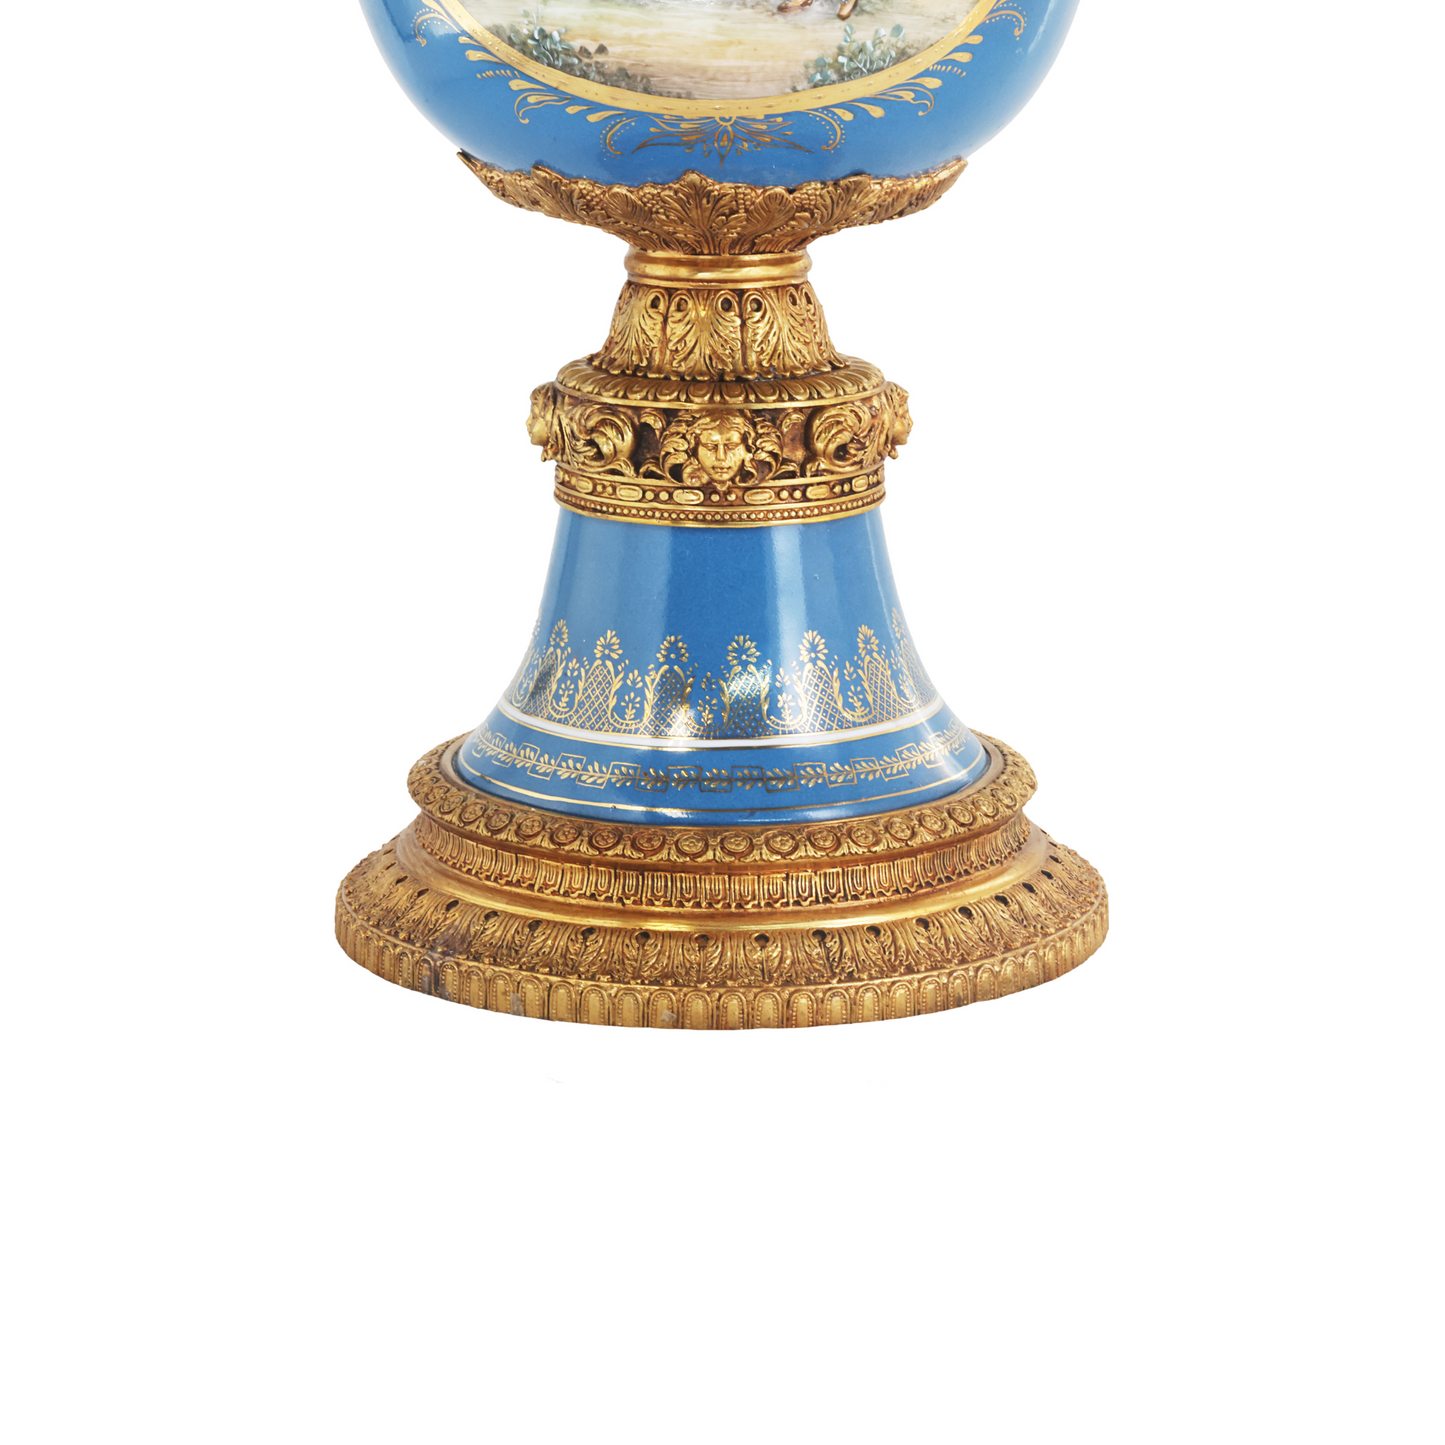 Hand-painted Teal Urn with Rococo Motifs